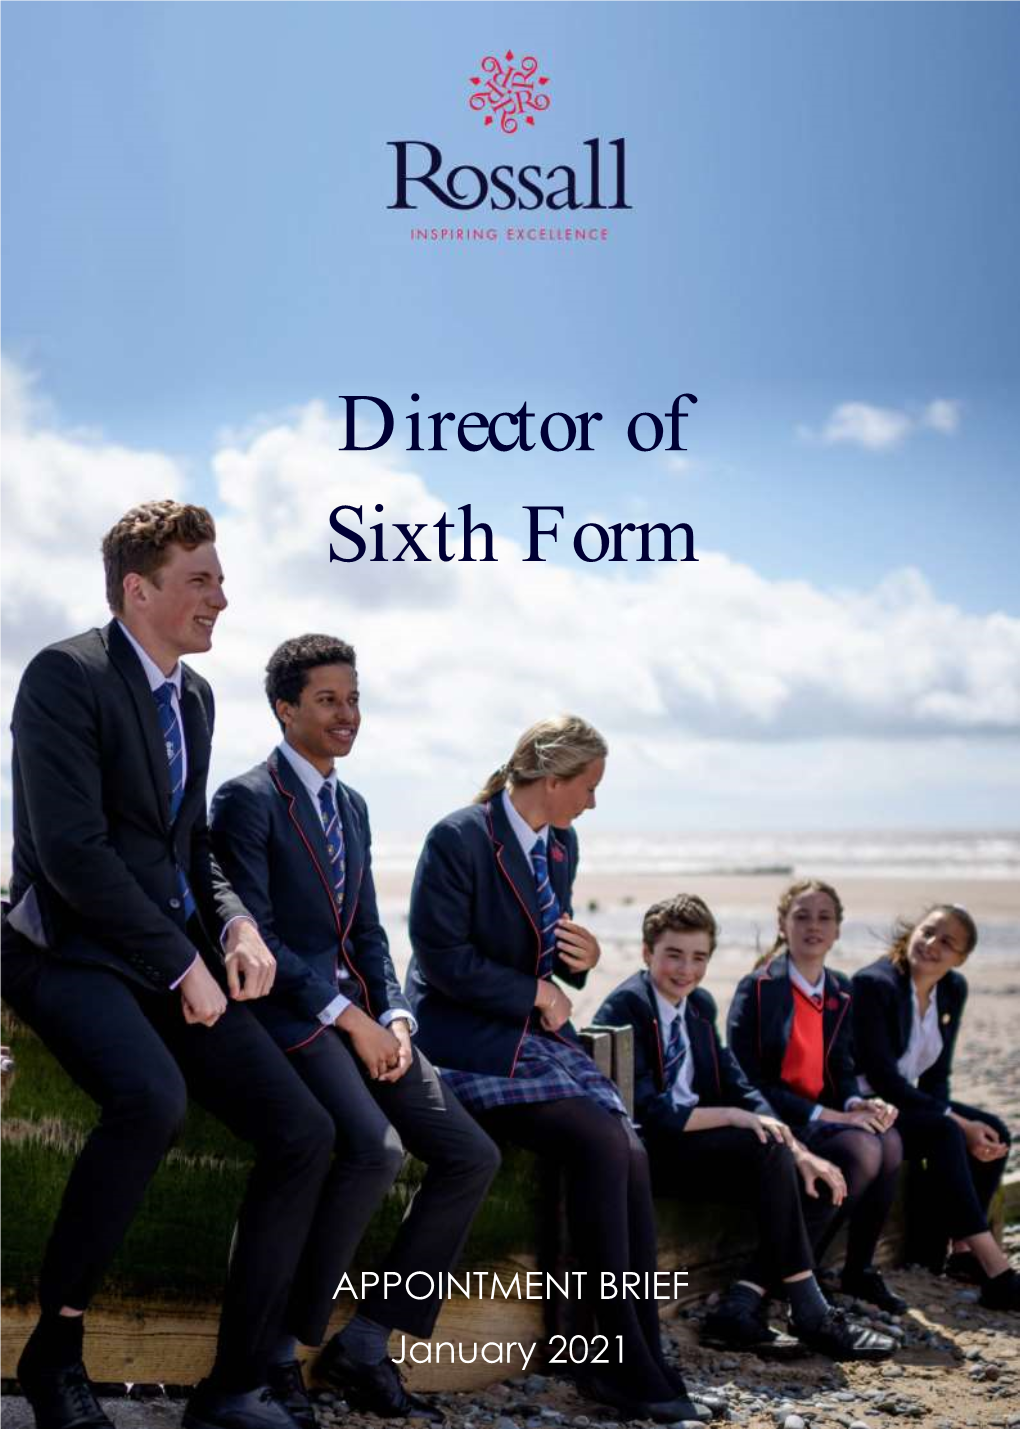 Director of Sixth Form